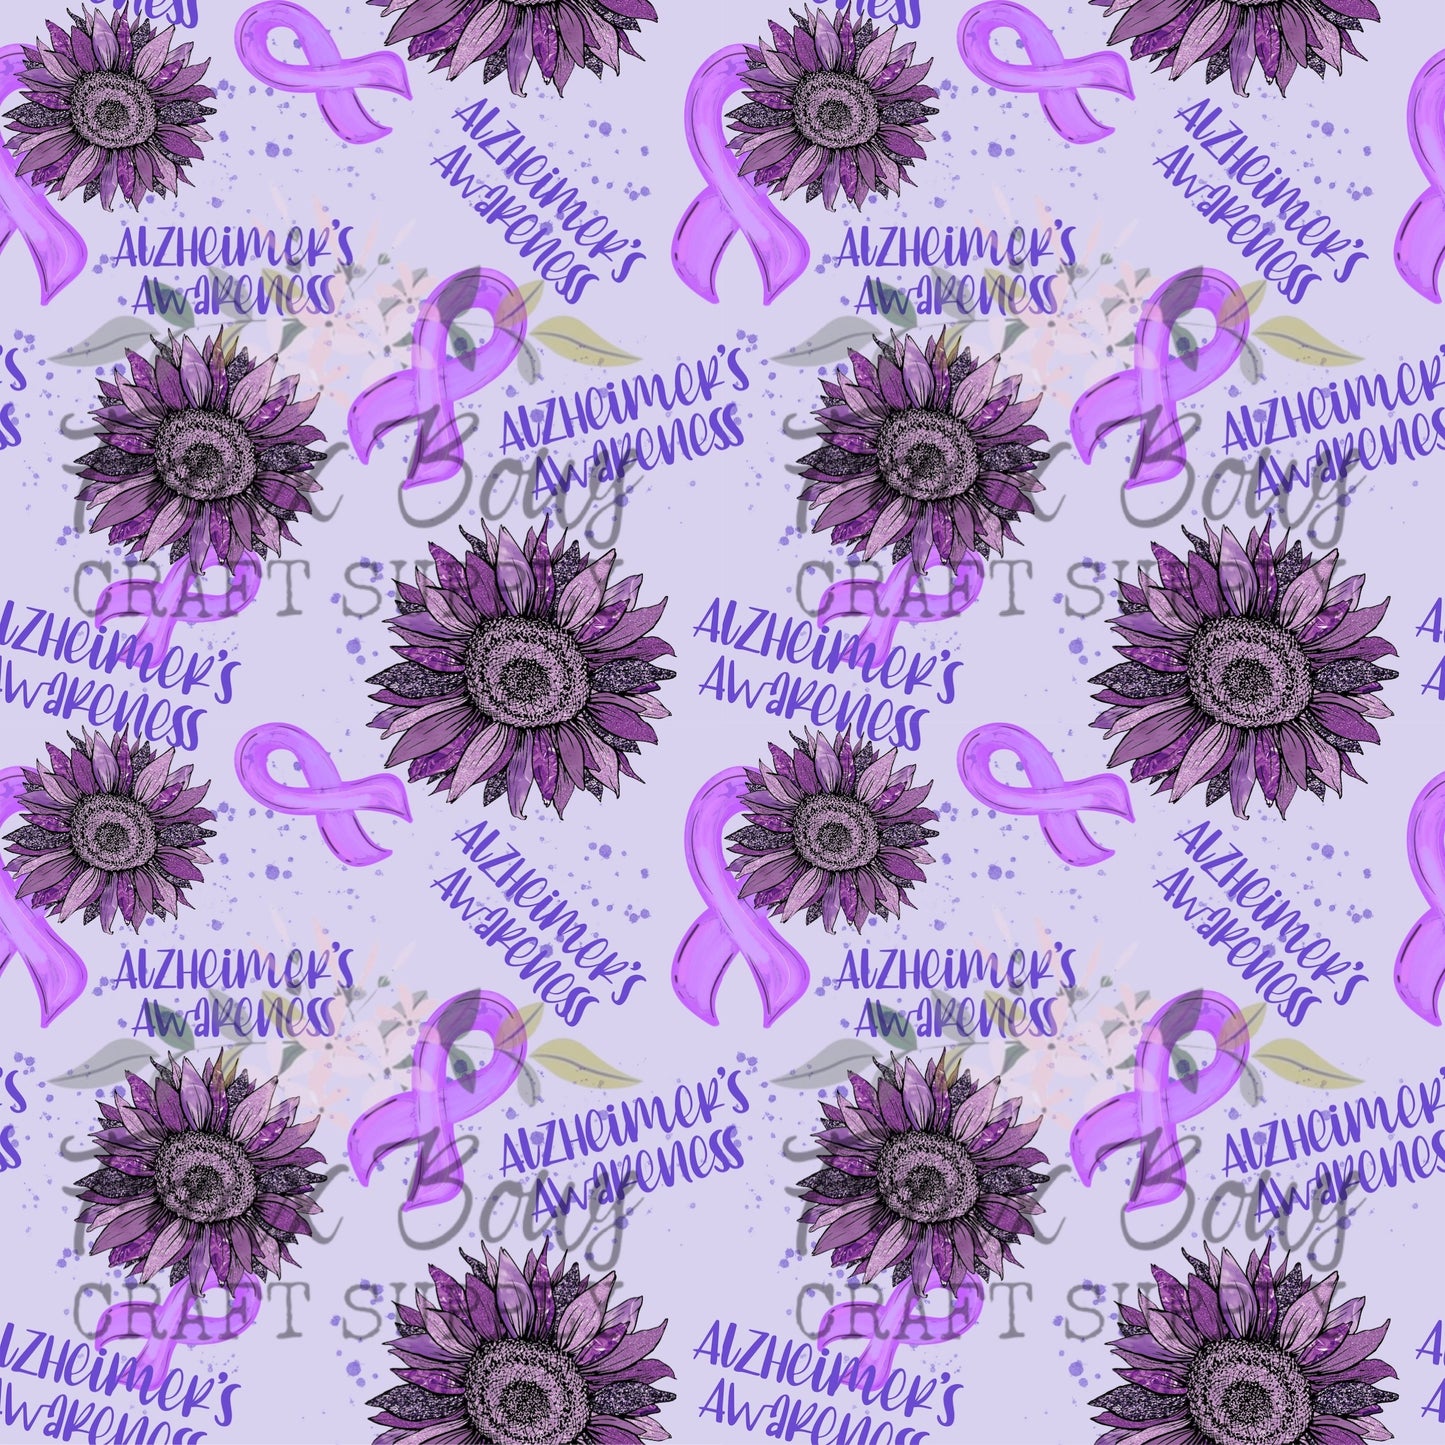 💜Alzheimer’s Awareness PRINTED Pebbled Leather